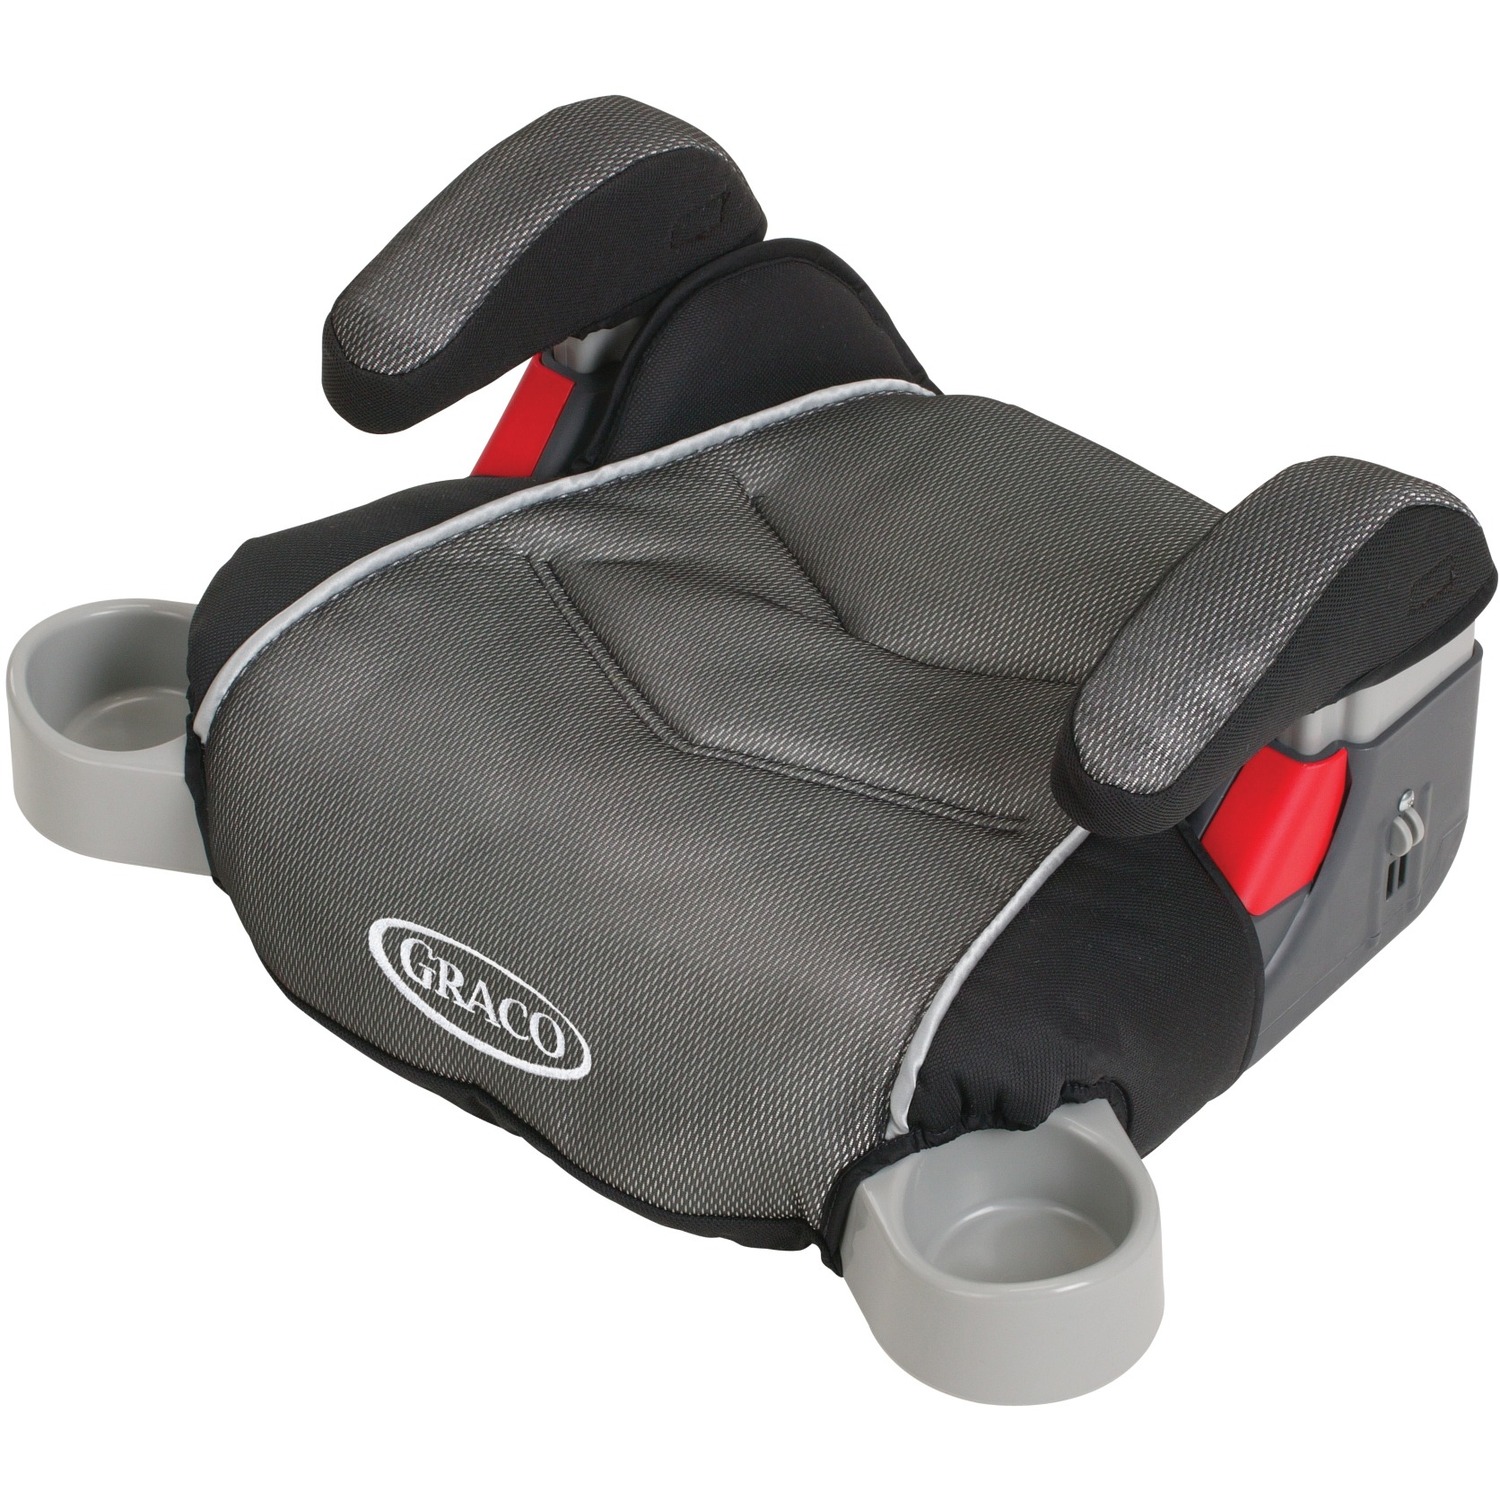 Graco Turbobooster Backless Forward Facing Booster Car Seat, Galaxy - image 3 of 5